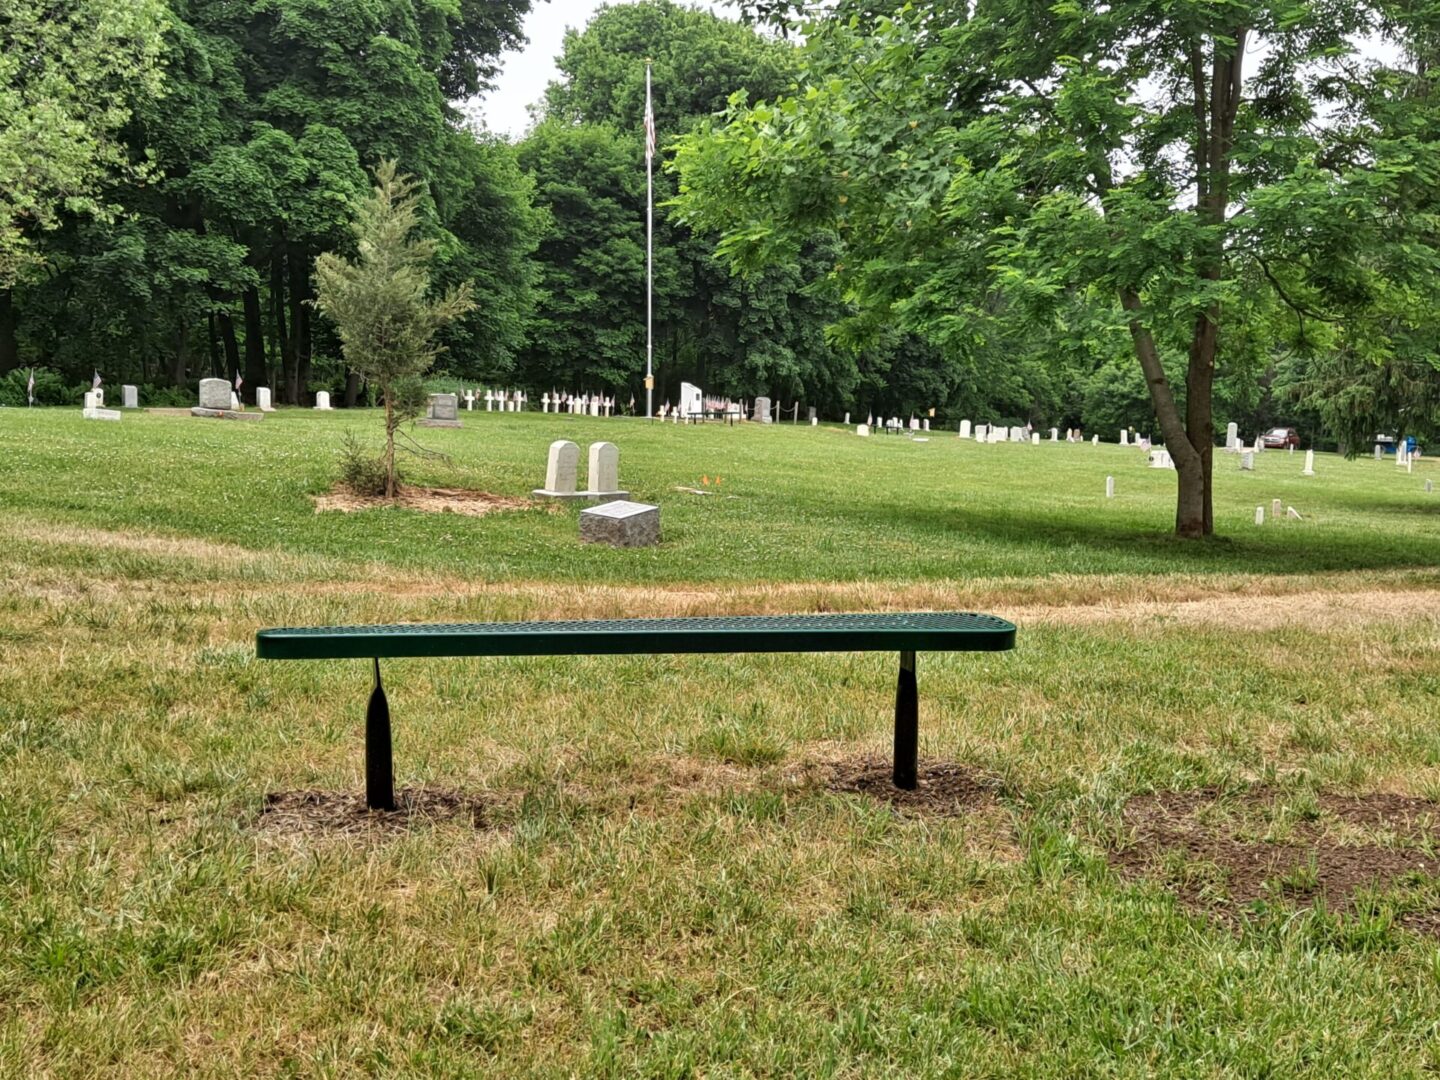 Closeup view of a bench with trees and grass